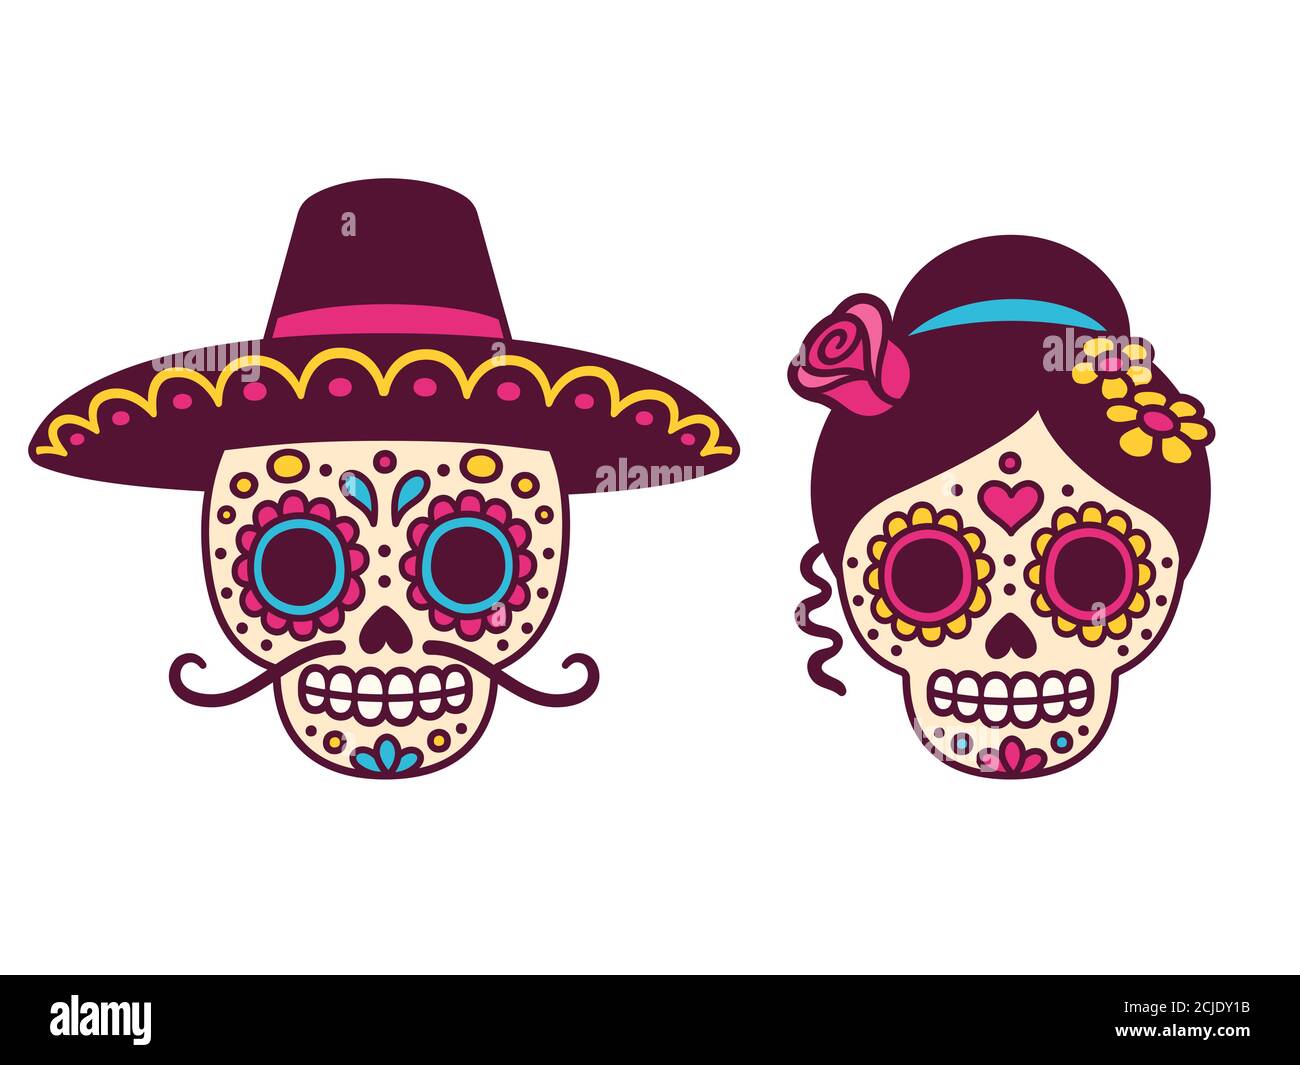 Cartoon Mexican sugar skulls couple for Dia de los Muertos (Day of the Dead). Male skull with mustache and sombrero hat and female with flowers. Cute Stock Vector